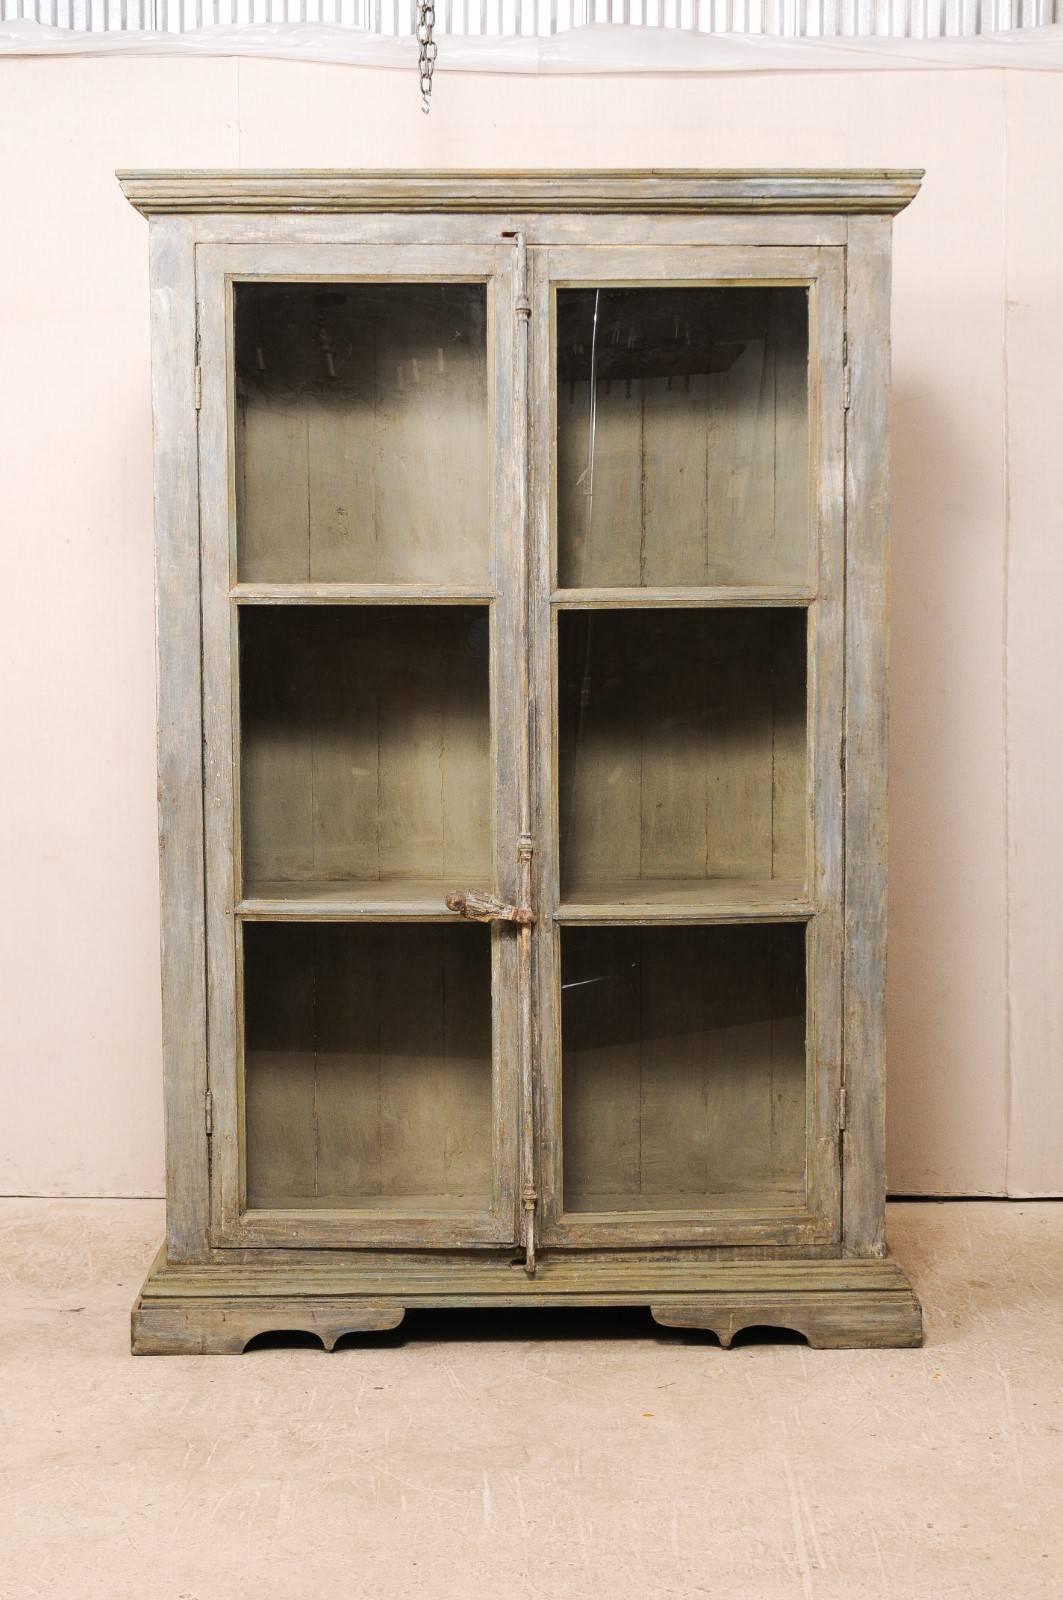 A tall display cabinet of 19th century French windows and reclaimed wood. This tall custom-made cabinet is comprised of two doors made from 19th century French windows, and a body of reclaimed and painted wood. This cabinet has substantial metal